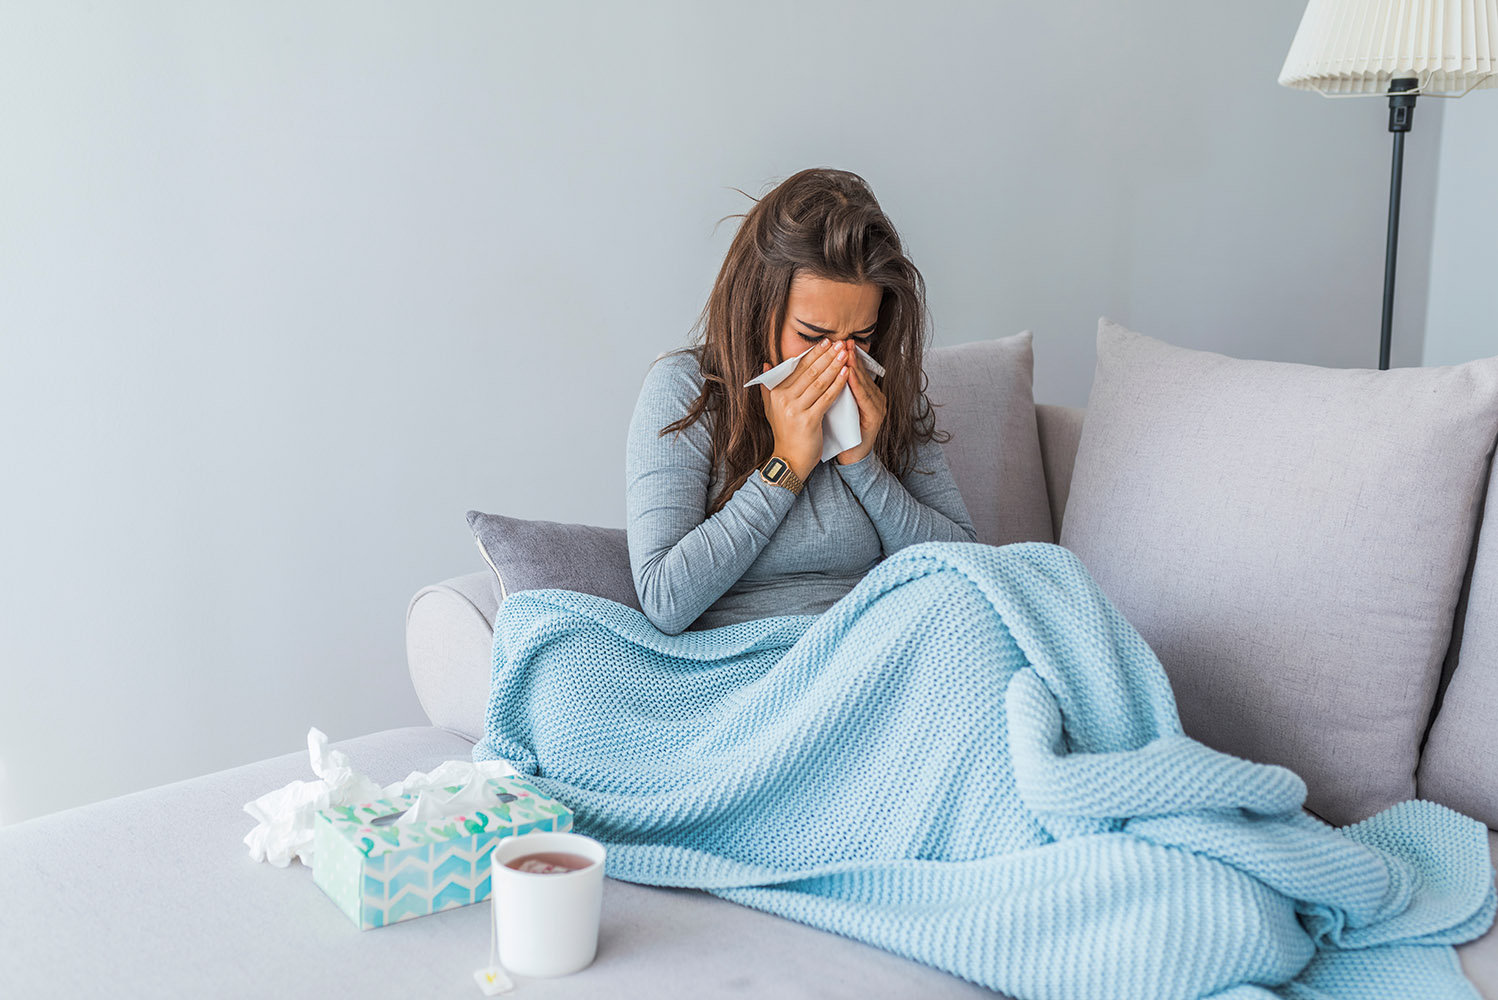 Cold Vs Flu – How To Tell The Difference